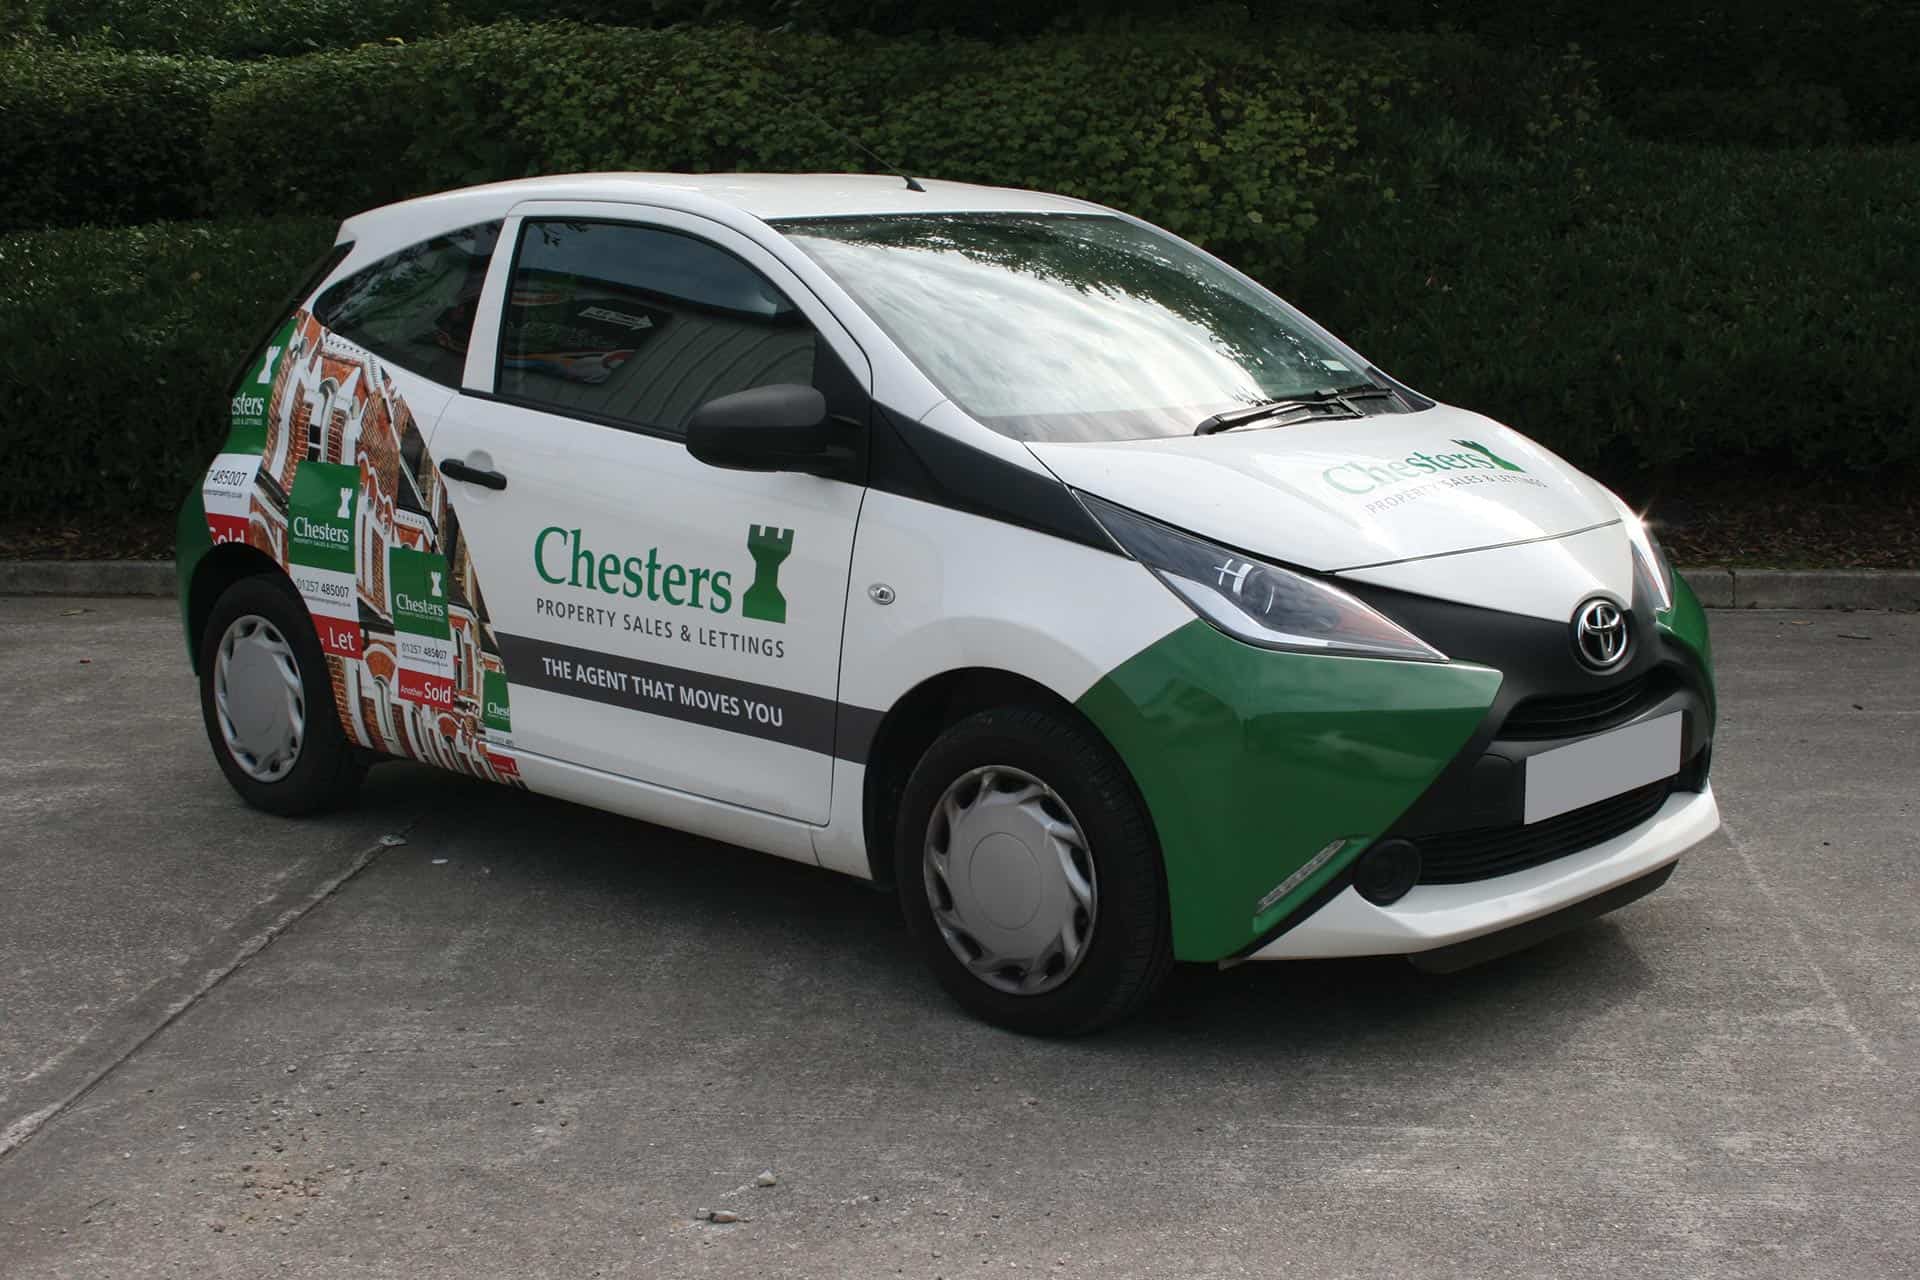 Chesters Property Sales and Letting - full colour vinyl car graphics